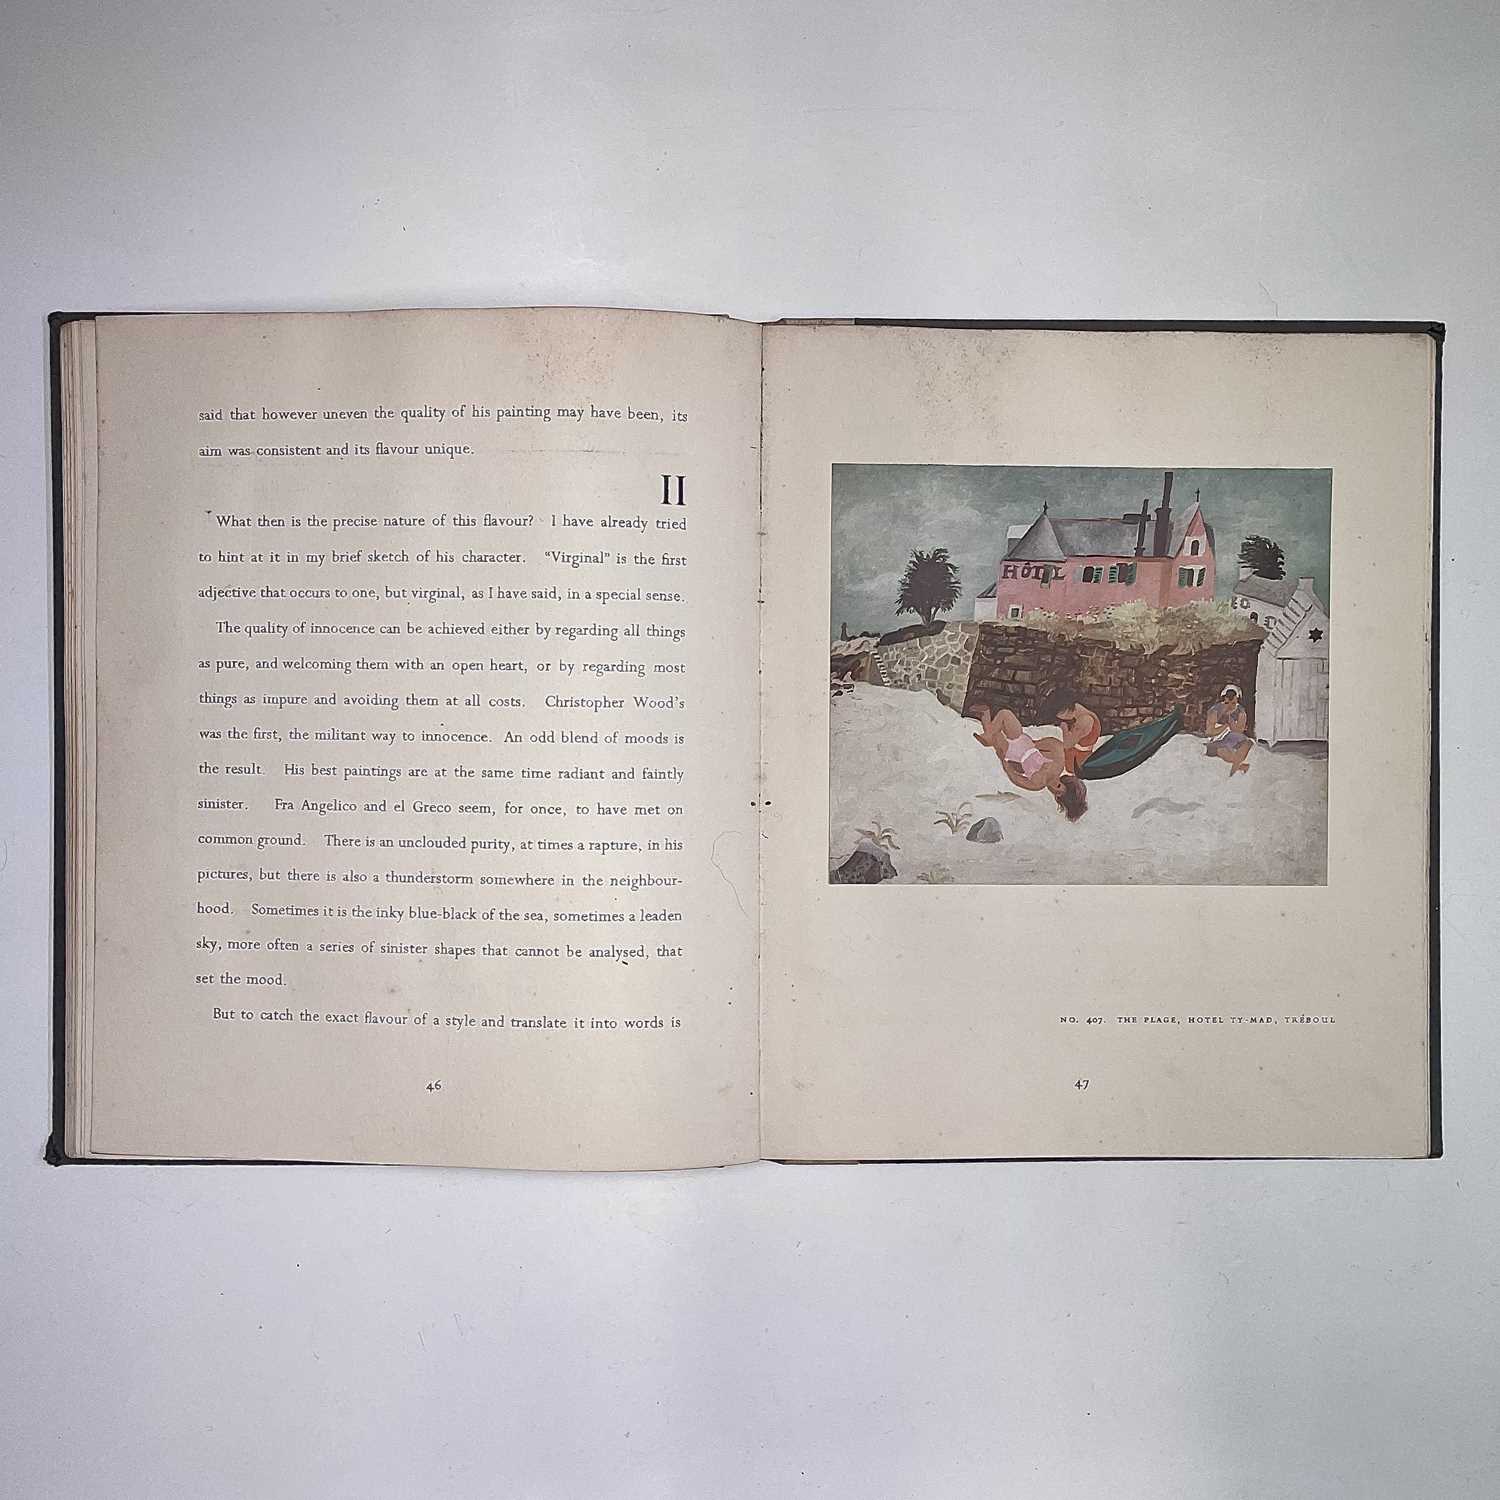 Christopher WOOD 'Exhibition of Complete Works' - hardback, first edition with original exhibition - Image 6 of 7